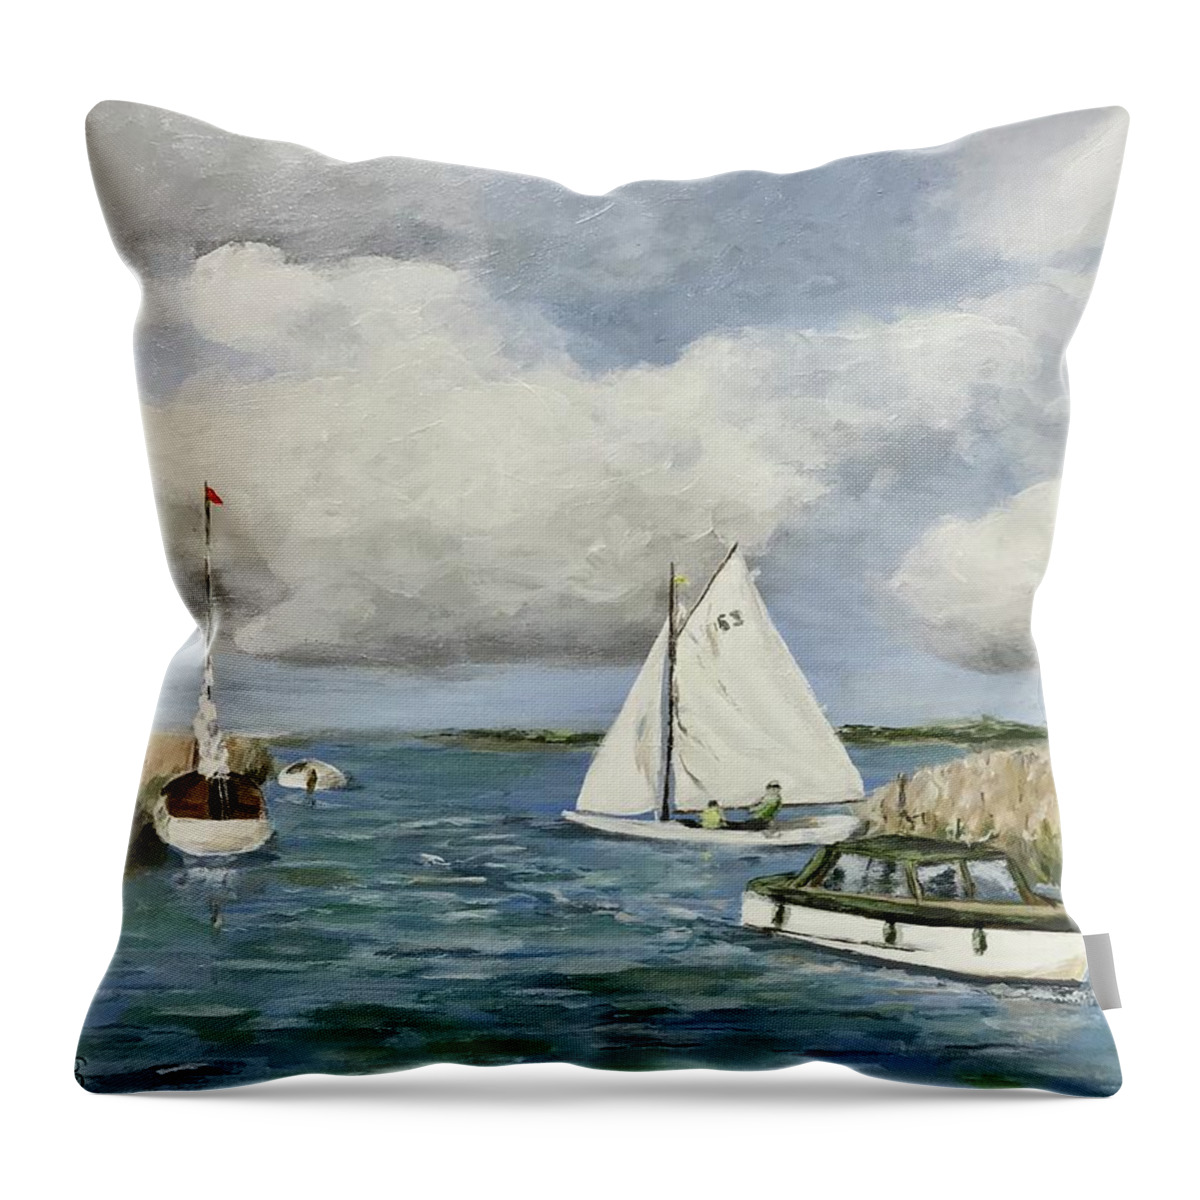 Sailing Throw Pillow featuring the painting September River by Deborah Smith